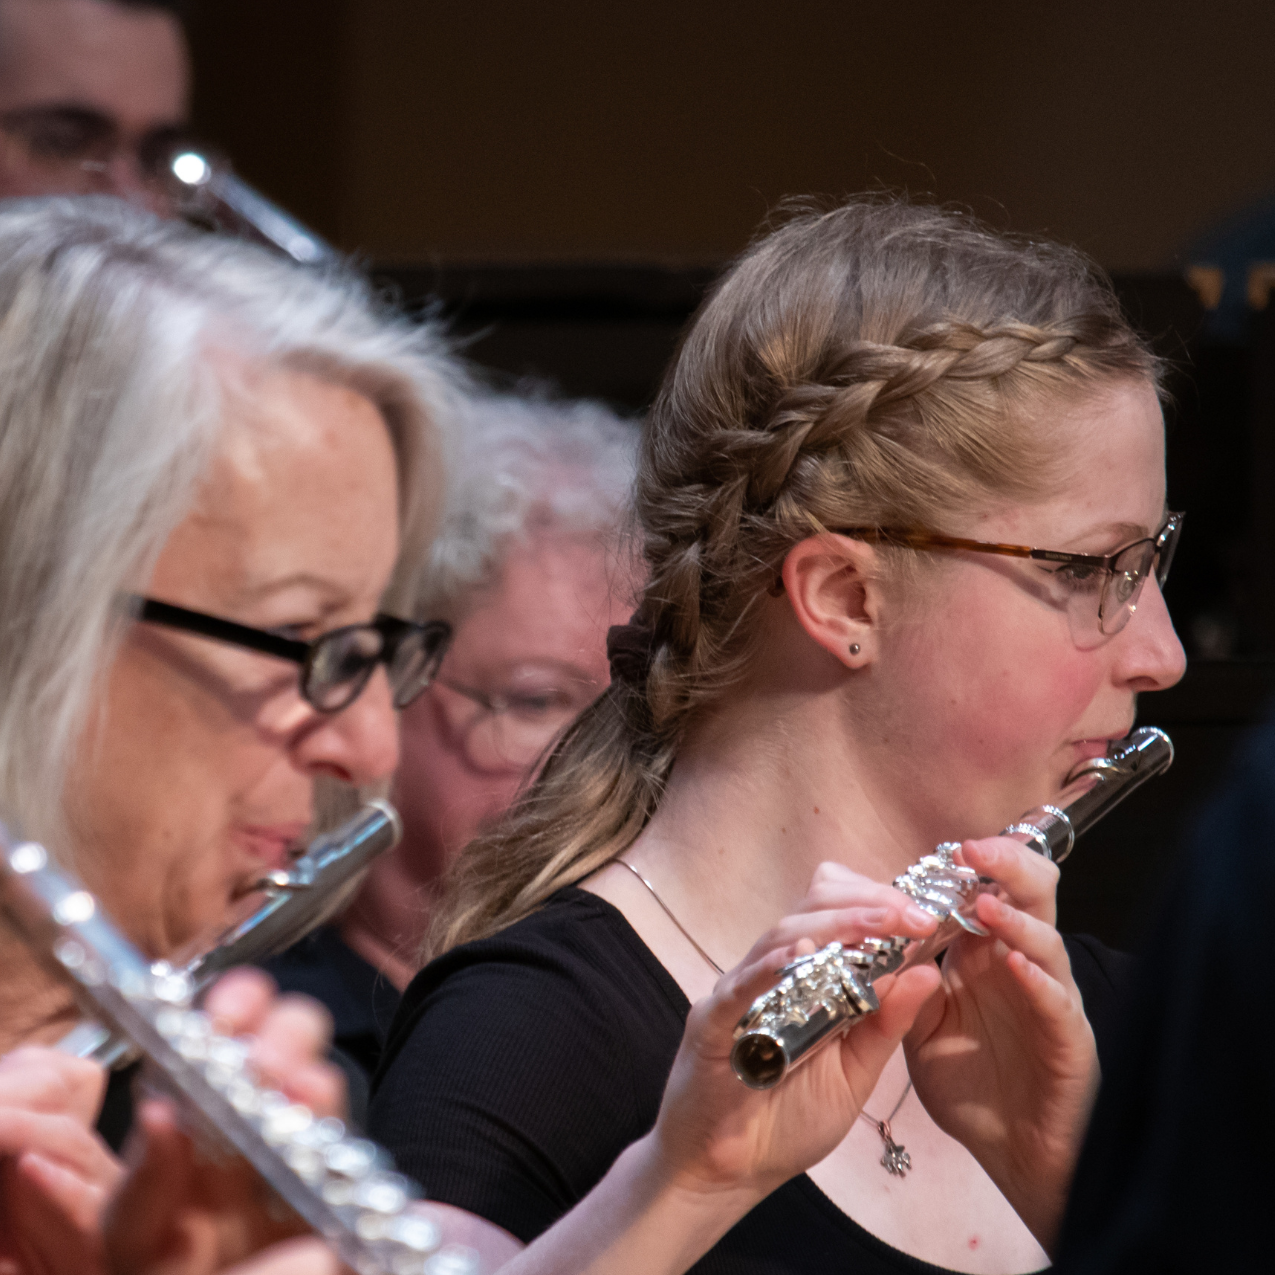 ISU band members of the flute section play their flutes at a performance